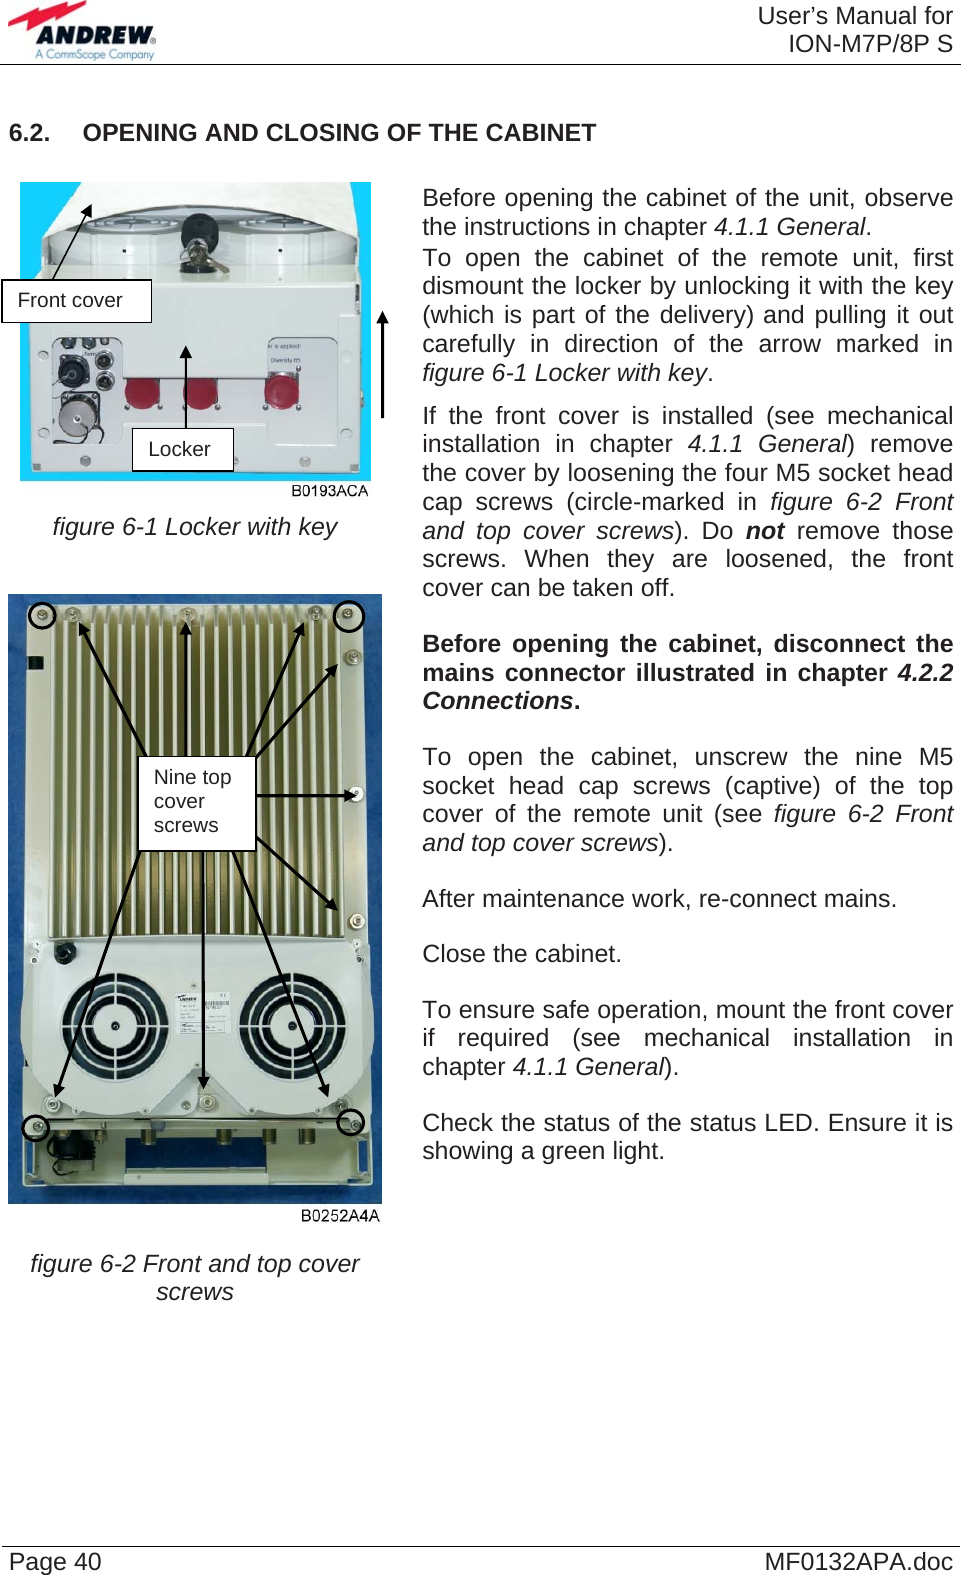  User’s Manual forION-M7P/8P S Page 40  MF0132APA.doc6.2.  OPENING AND CLOSING OF THE CABINET   figure 6-1 Locker with key  figure 6-2 Front and top cover screws   Before opening the cabinet of the unit, observe the instructions in chapter 4.1.1 General.   To open the cabinet of the remote unit, first dismount the locker by unlocking it with the key (which is part of the delivery) and pulling it out carefully in direction of the arrow marked in figure 6-1 Locker with key.   If the front cover is installed (see mechanical installation in chapter 4.1.1 General) remove the cover by loosening the four M5 socket head cap screws (circle-marked in figure 6-2 Front and top cover screws). Do not remove those screws. When they are loosened, the front cover can be taken off.   Before opening the cabinet, disconnect the mains connector illustrated in chapter 4.2.2 Connections.   To open the cabinet, unscrew the nine M5 socket head cap screws (captive) of the top cover of the remote unit (see figure 6-2 Front and top cover screws).   After maintenance work, re-connect mains.   Close the cabinet.   To ensure safe operation, mount the front cover if required (see mechanical installation in chapter 4.1.1 General).   Check the status of the status LED. Ensure it is showing a green light. Front cover Locker Nine top  cover screws   